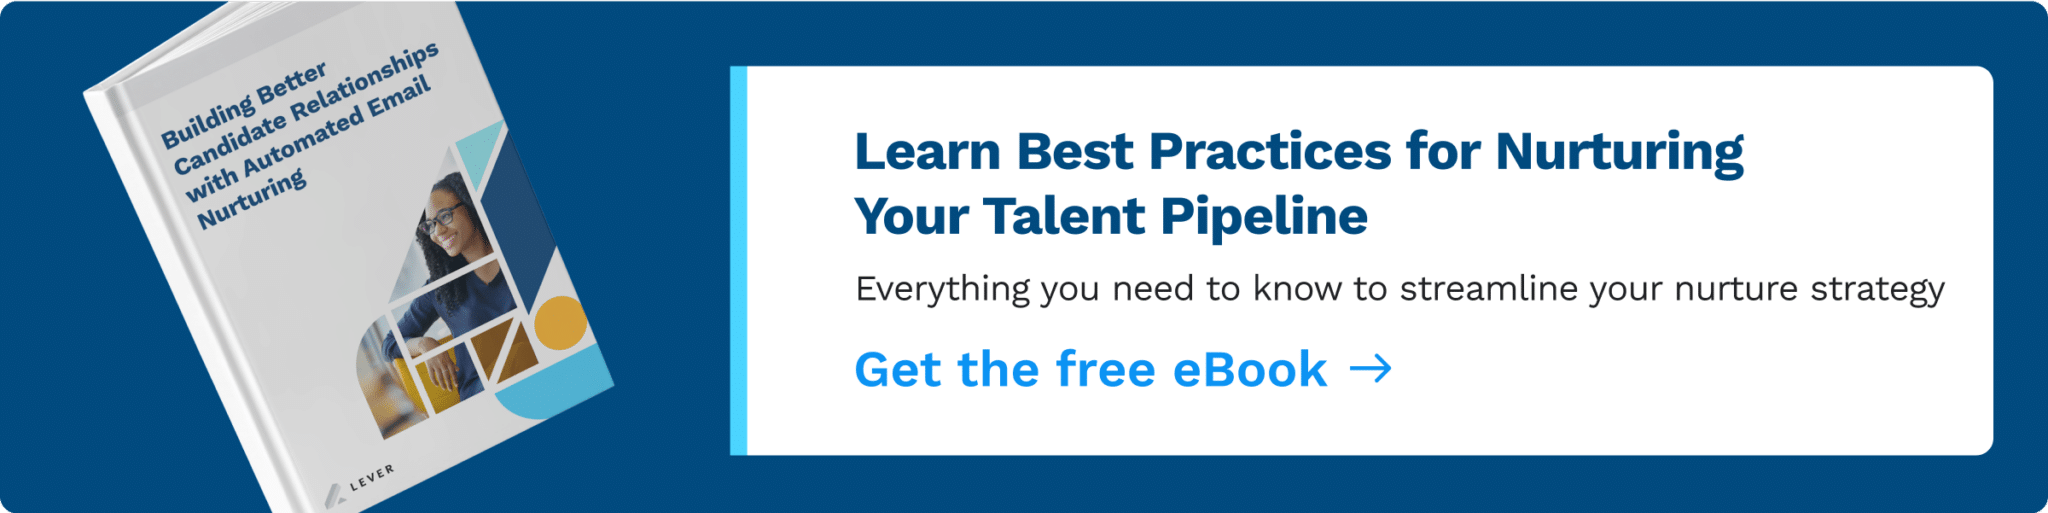 Learn Best Practices for Nurturing Your Talent Pipeline eBook